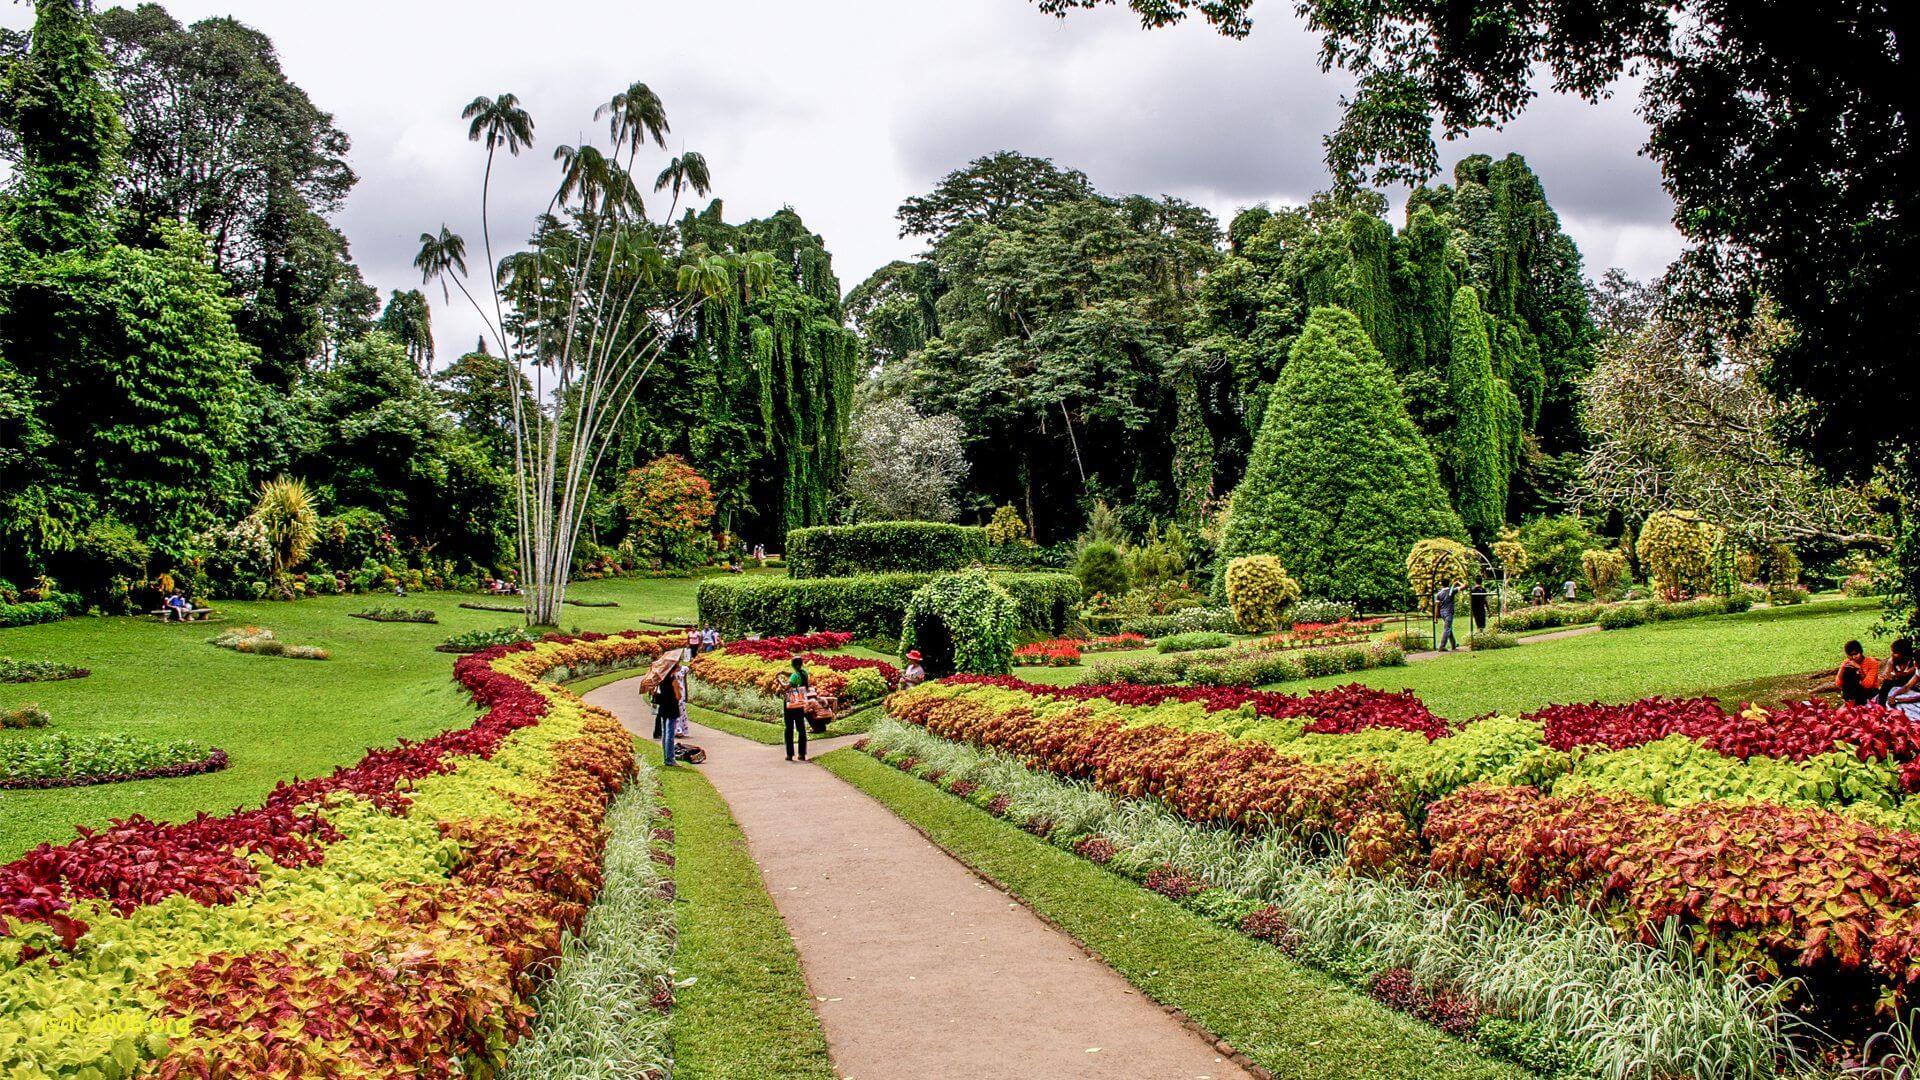 Things to do in Saint Lucia: The Botanical Garden